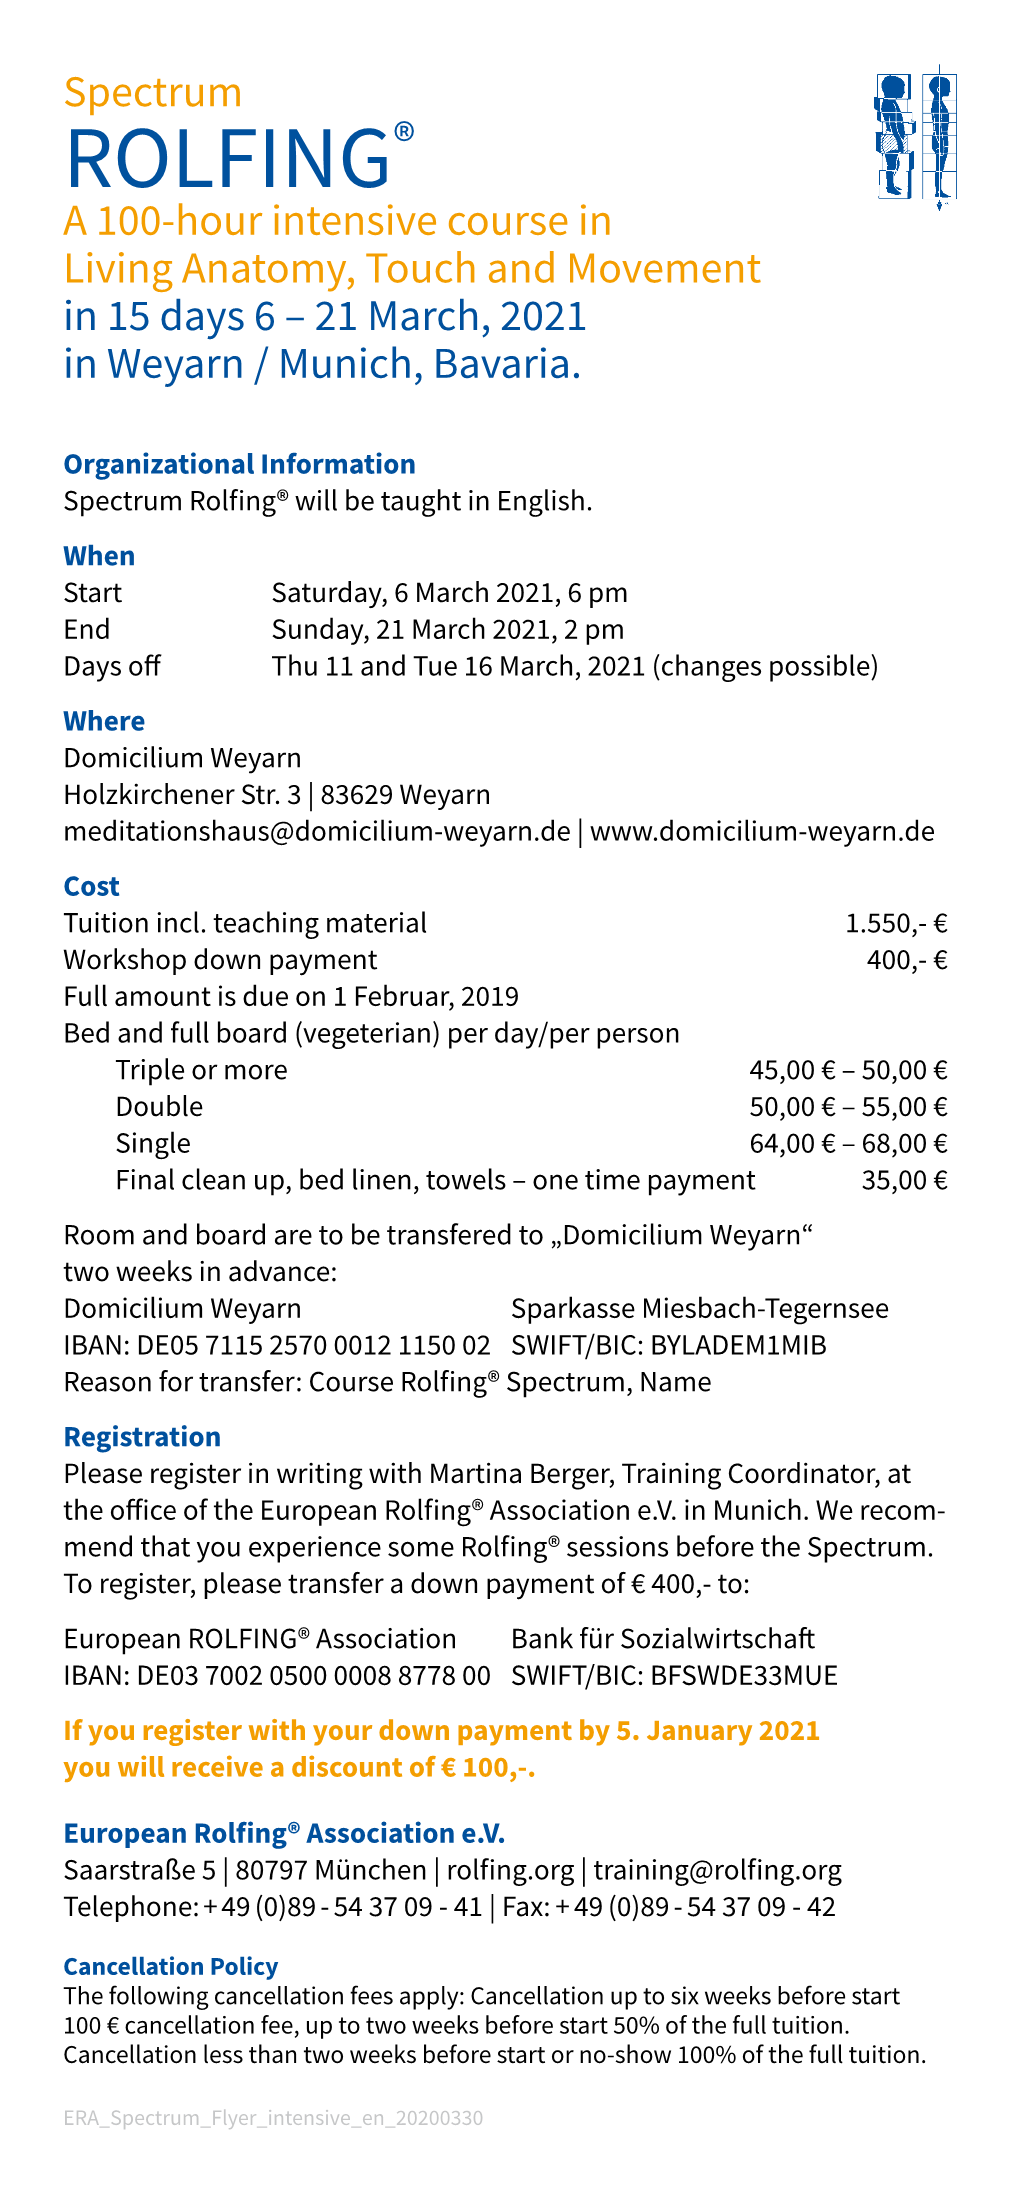 ROLFING® a 100-Hour Intensive Course in Living Anatomy, Touch and Movement in 15 Days 6 – 21 March, 2021 in Weyarn / Munich, Bavaria